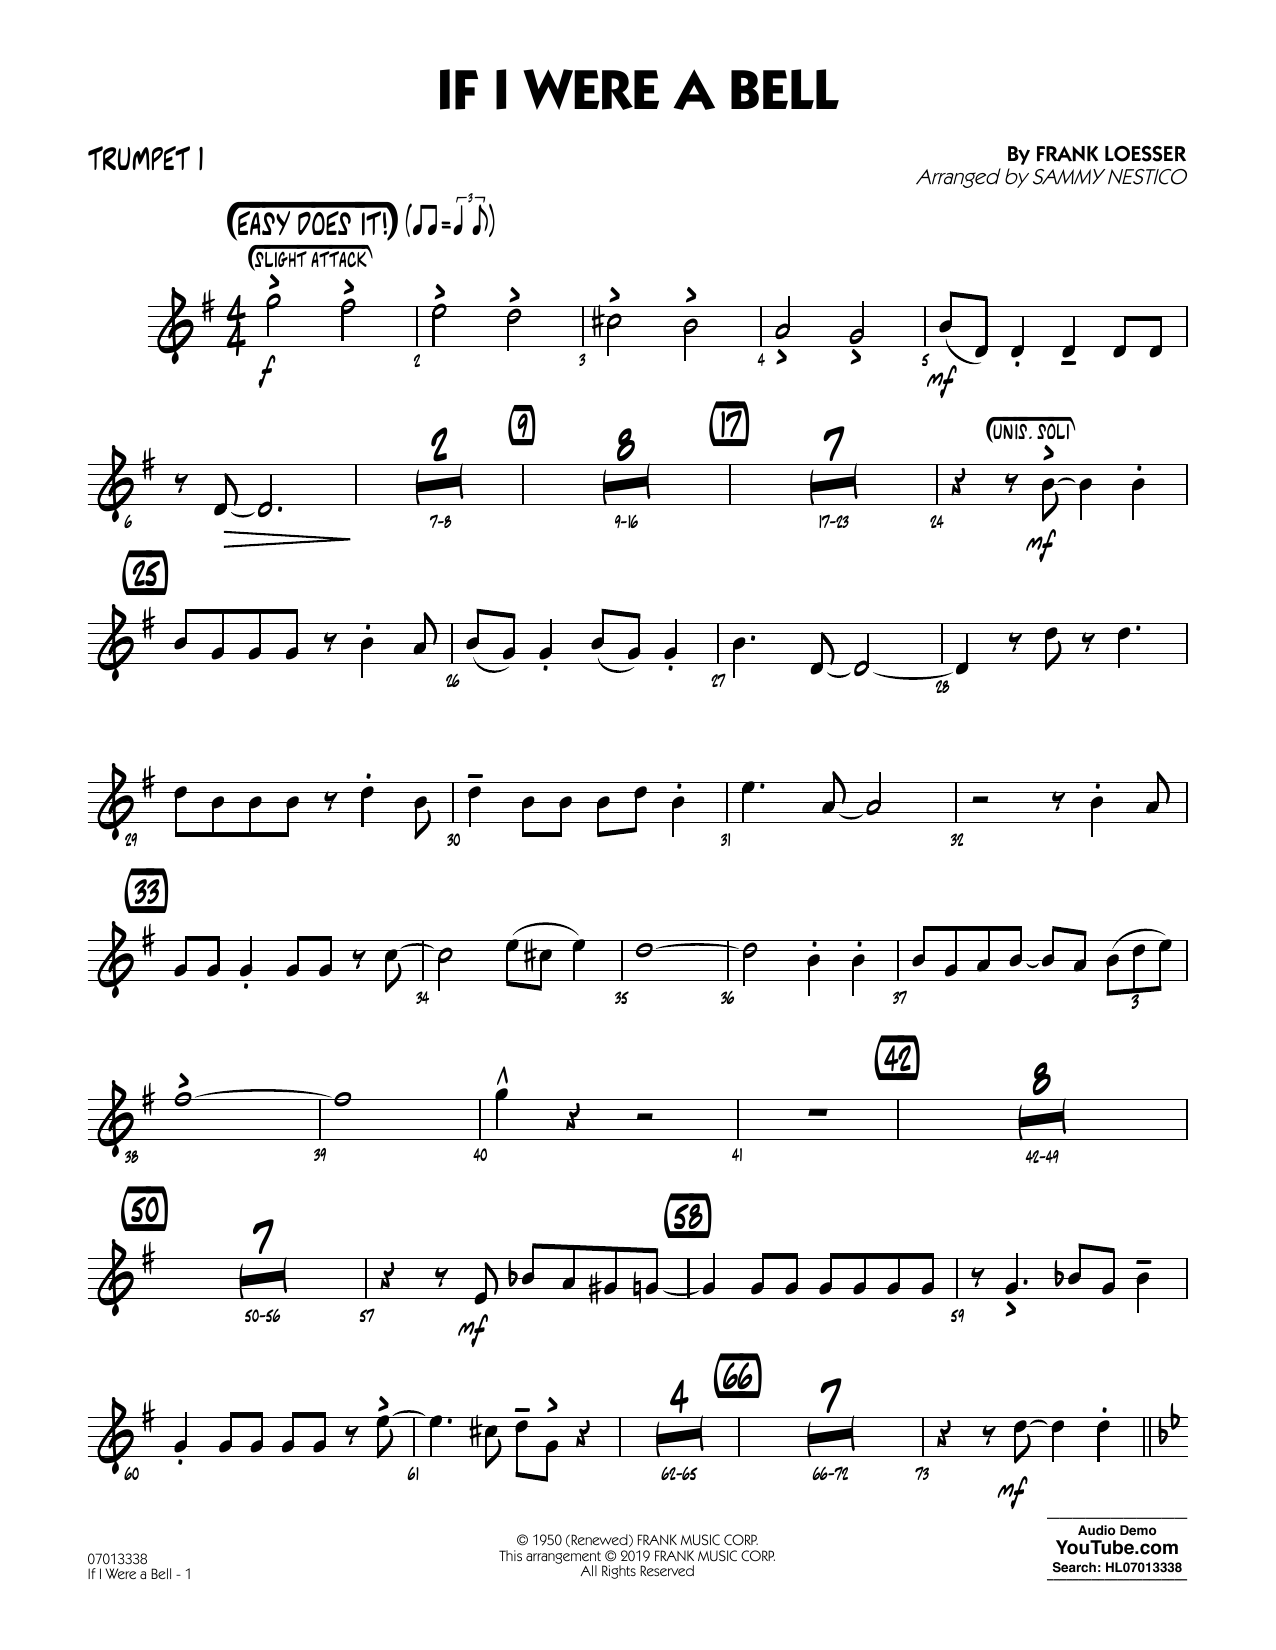 Frank Loesser If I Were a Bell (arr. Sammy Nestico) - Trumpet 1 sheet music preview music notes and score for Jazz Ensemble including 2 page(s)